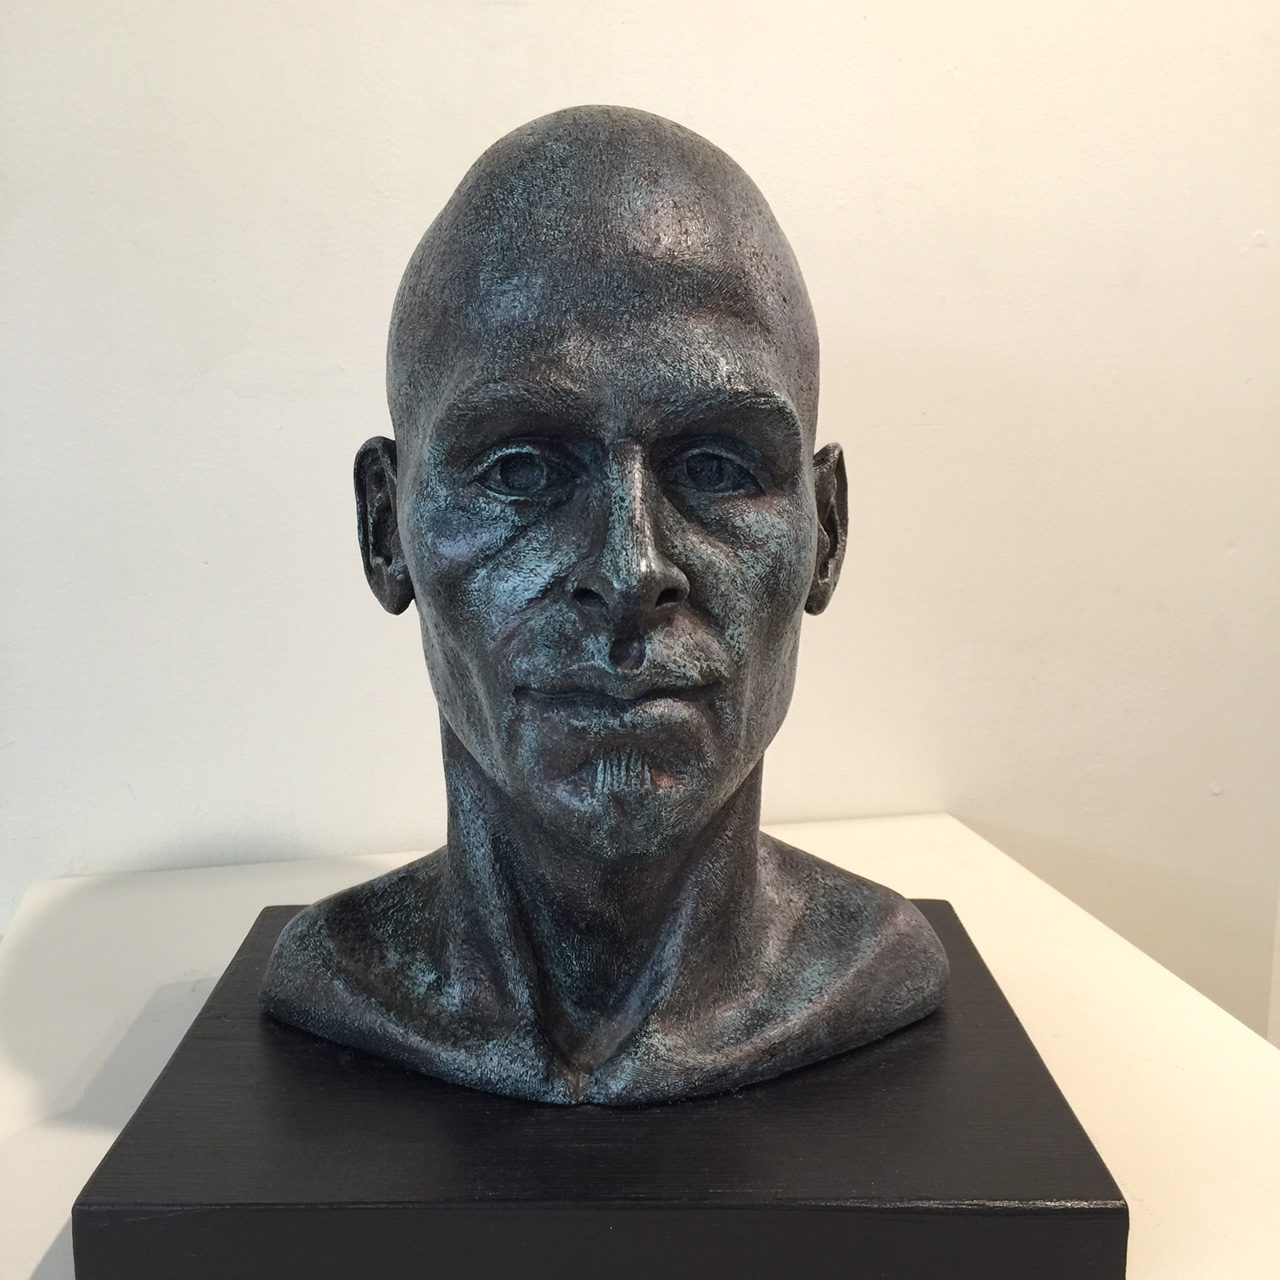 Ben, fired clay, acrylics and wax, by Viki Gable